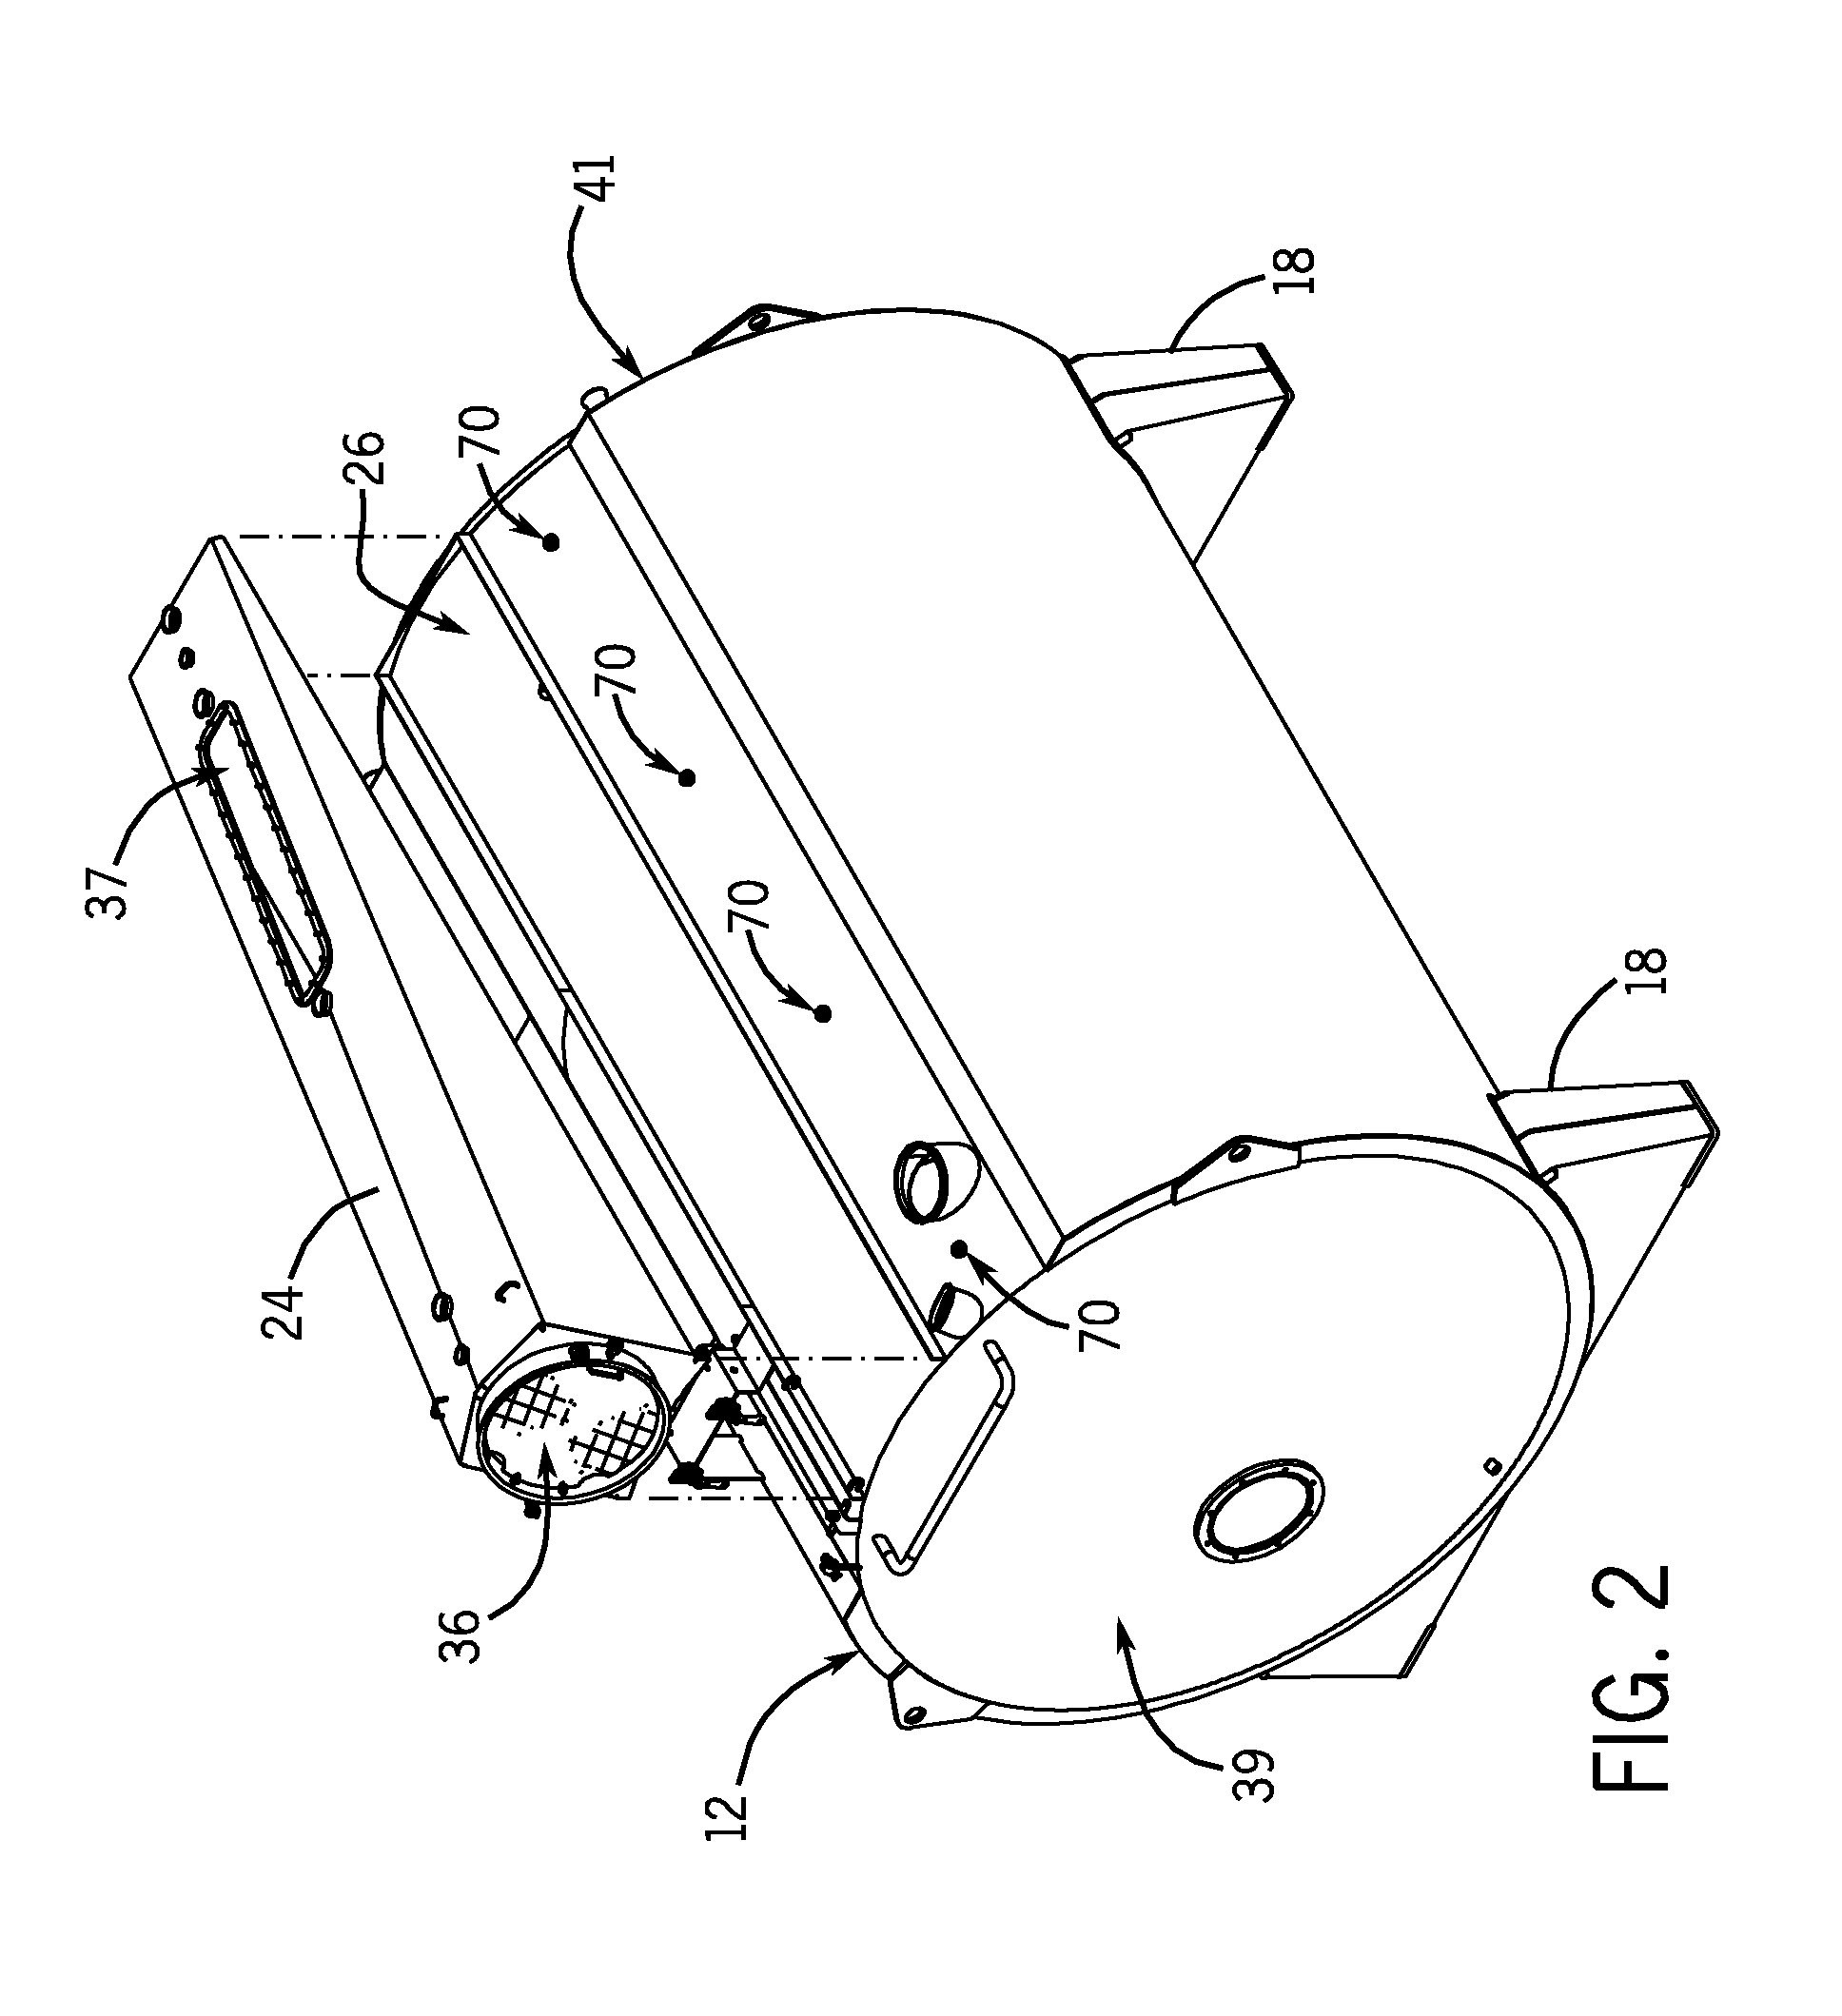 Rennet injection apparatus and method